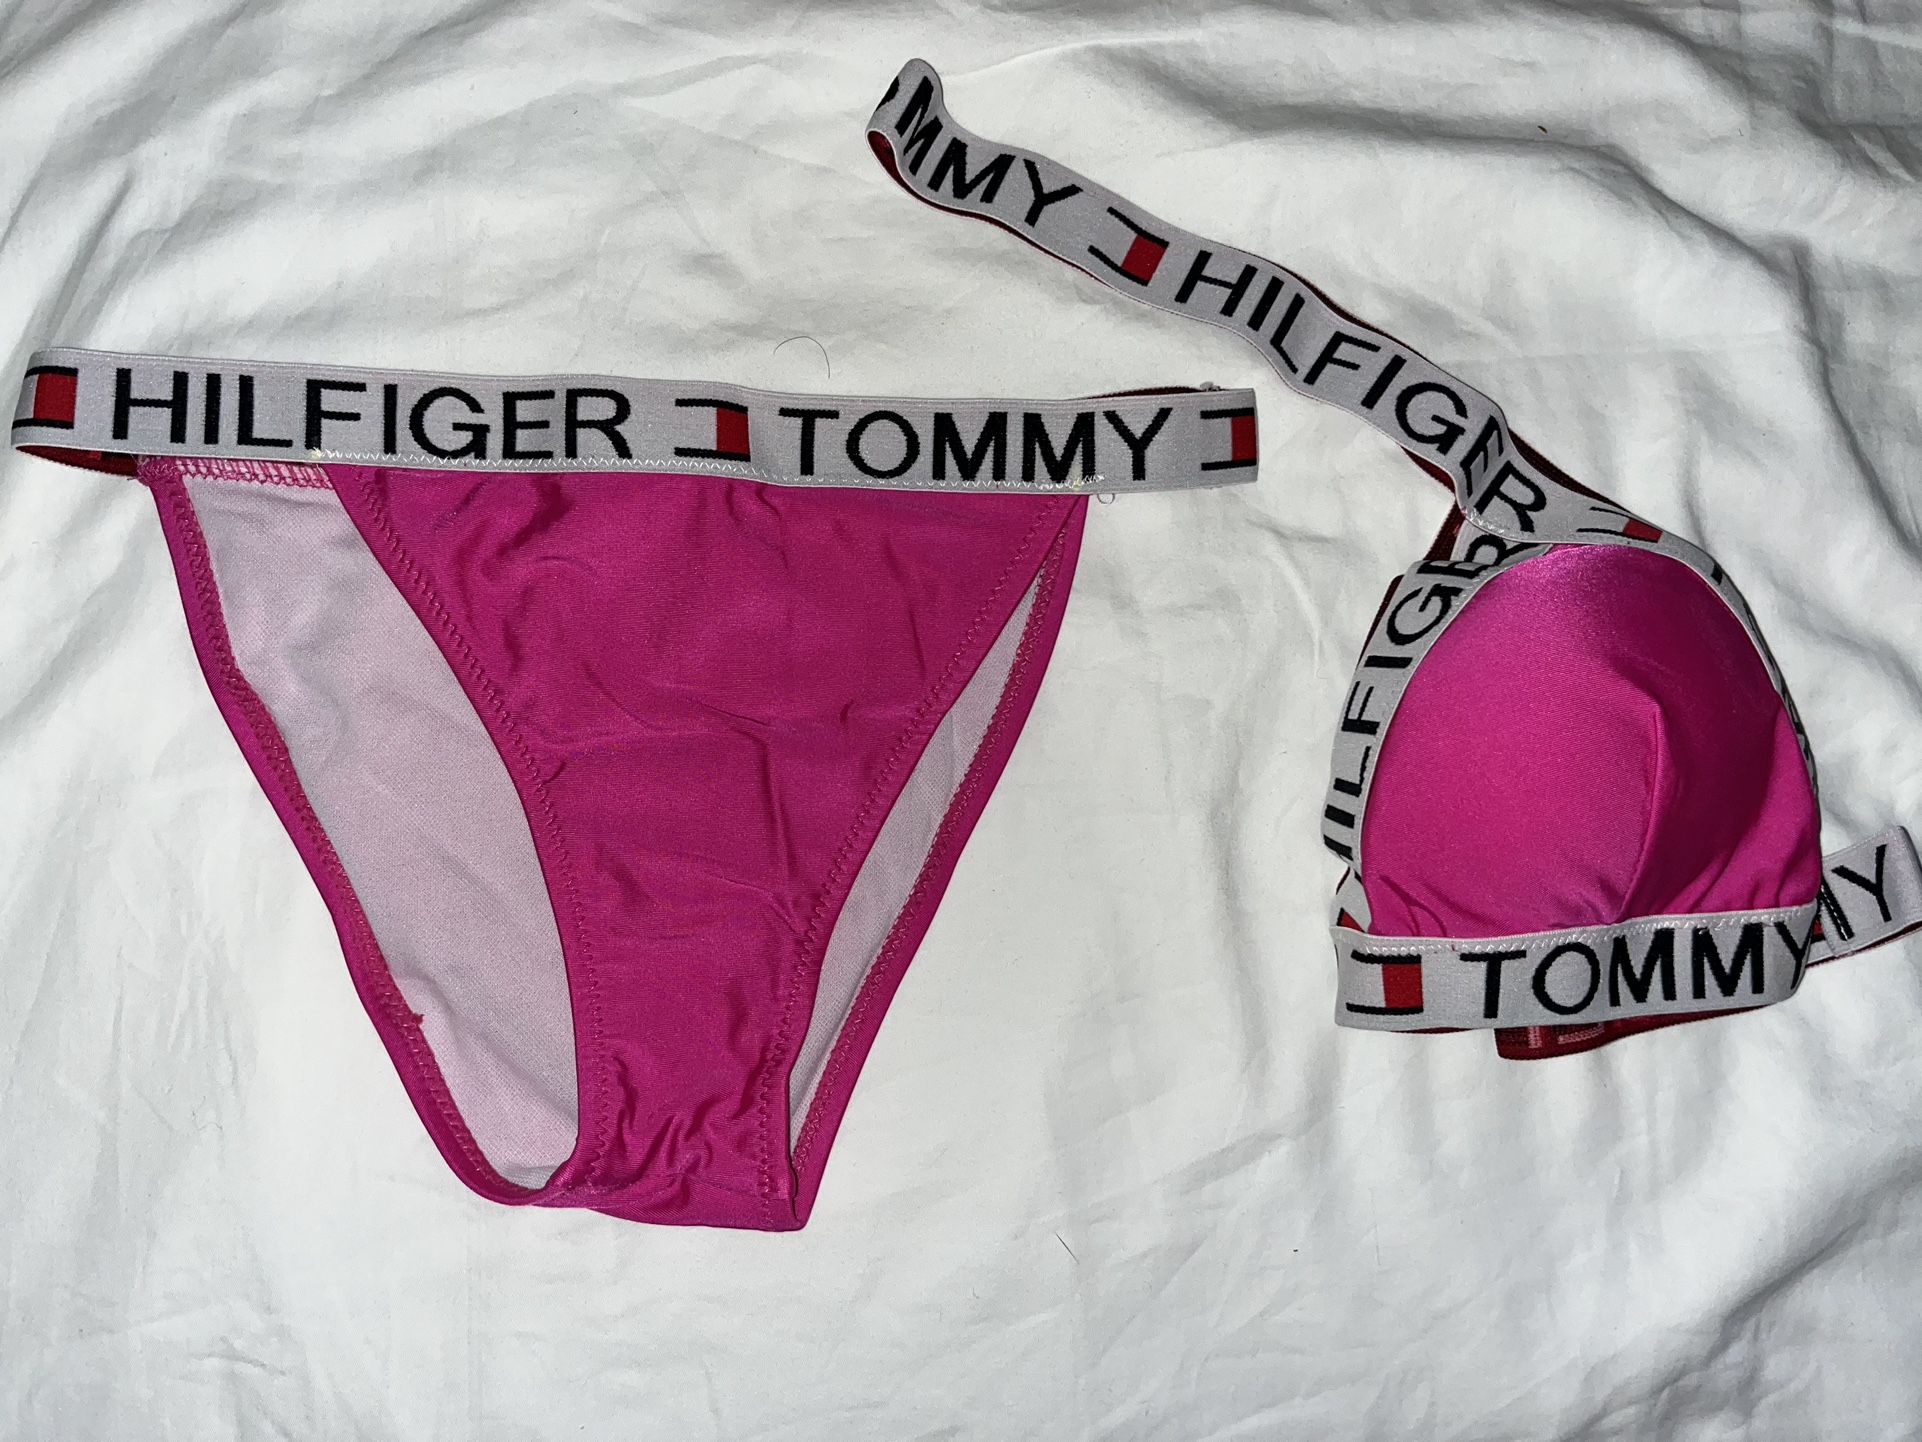 Tommy Hilfiger swimsuits